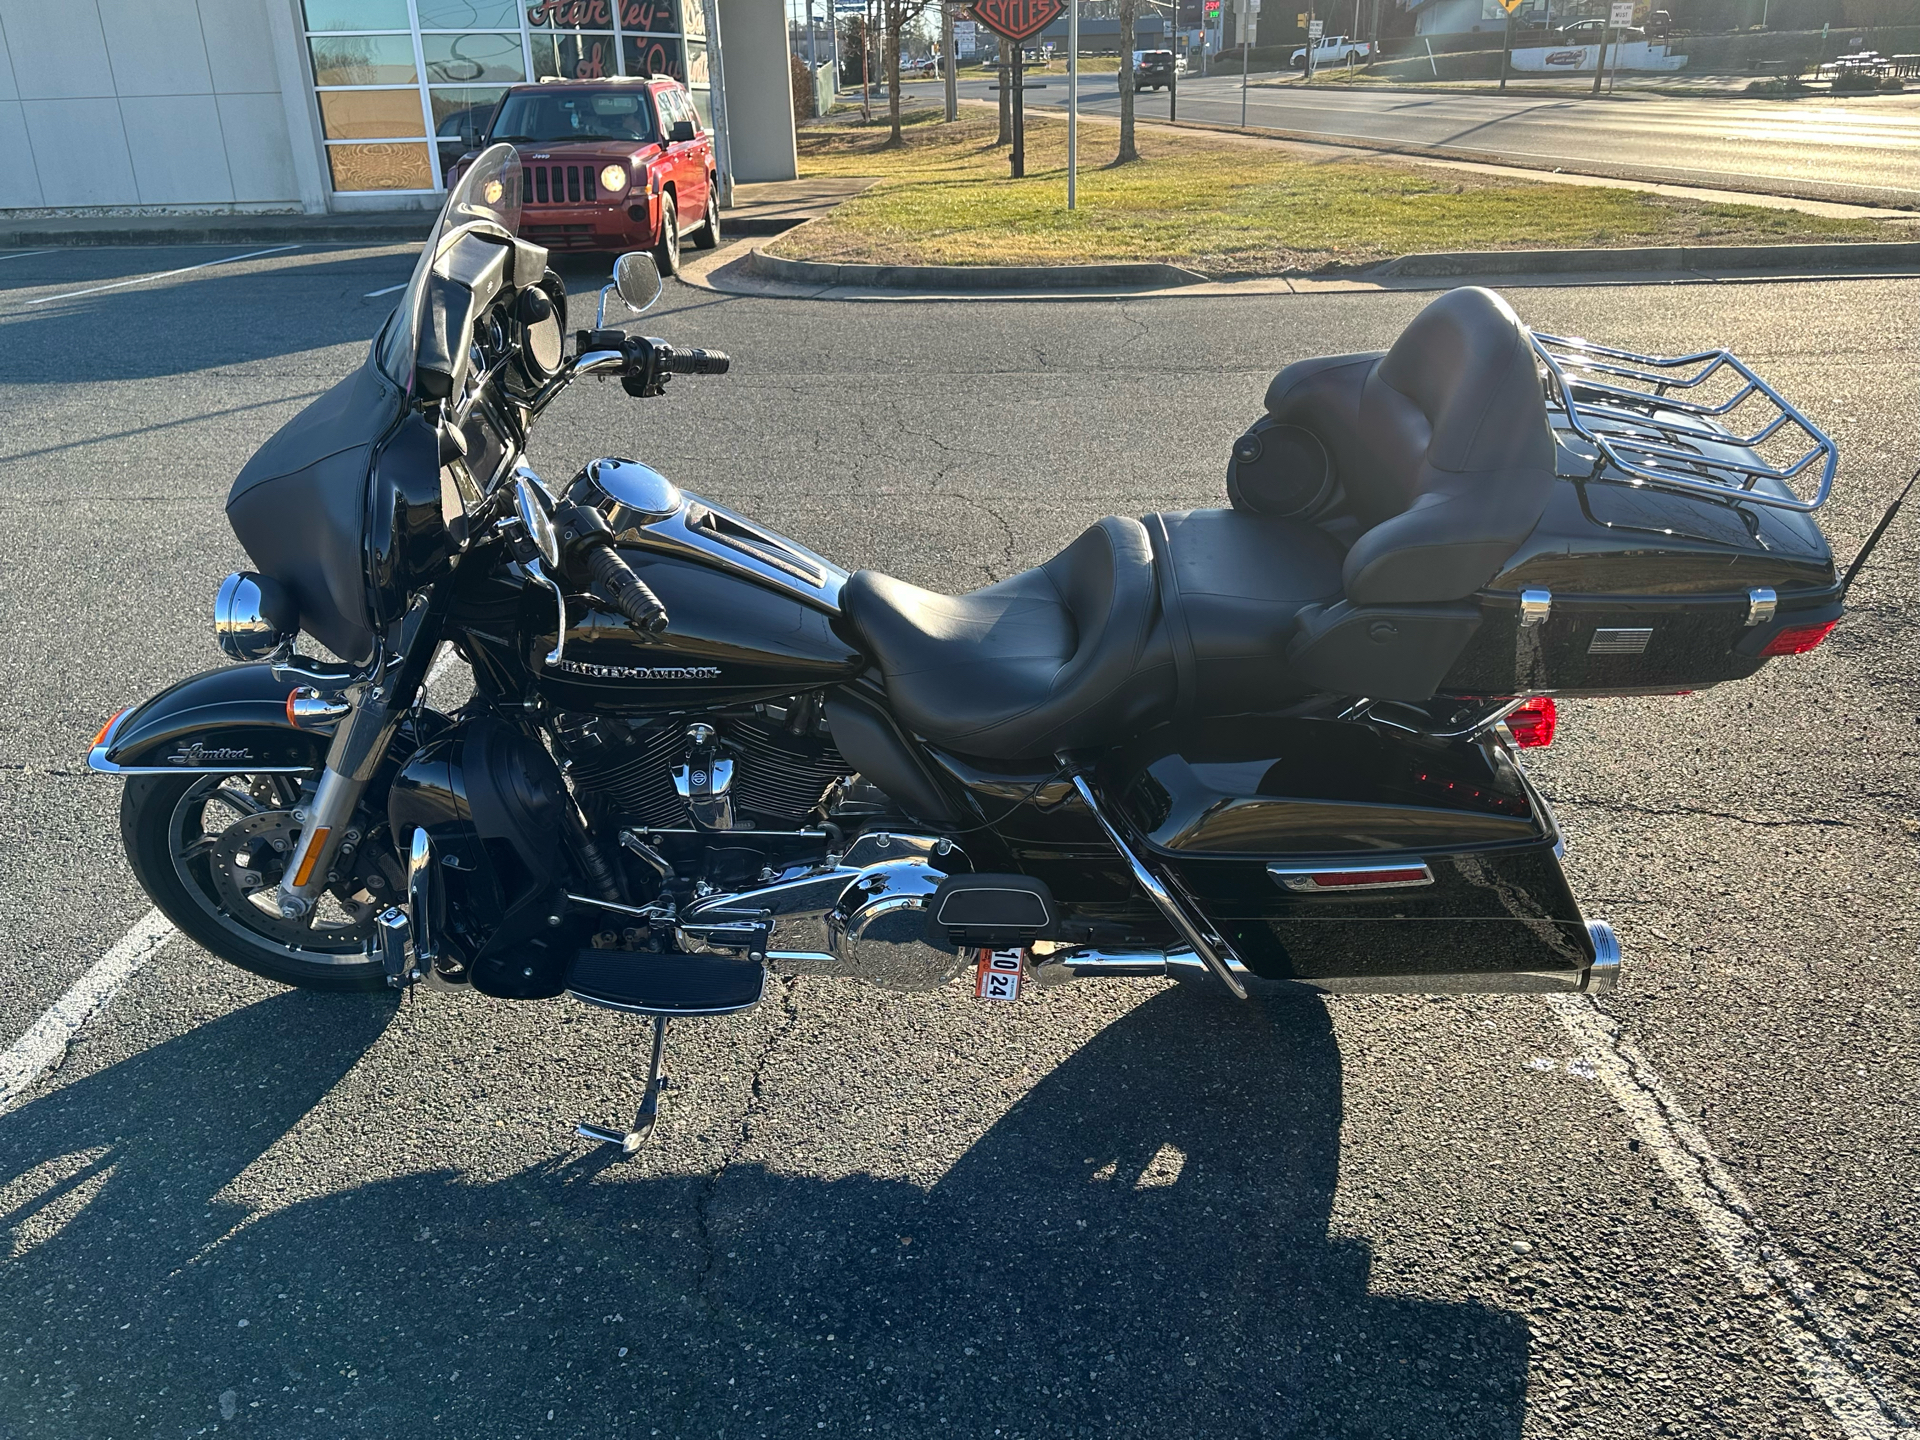 2017 Harley-Davidson Ultra Limited in Dumfries, Virginia - Photo 5